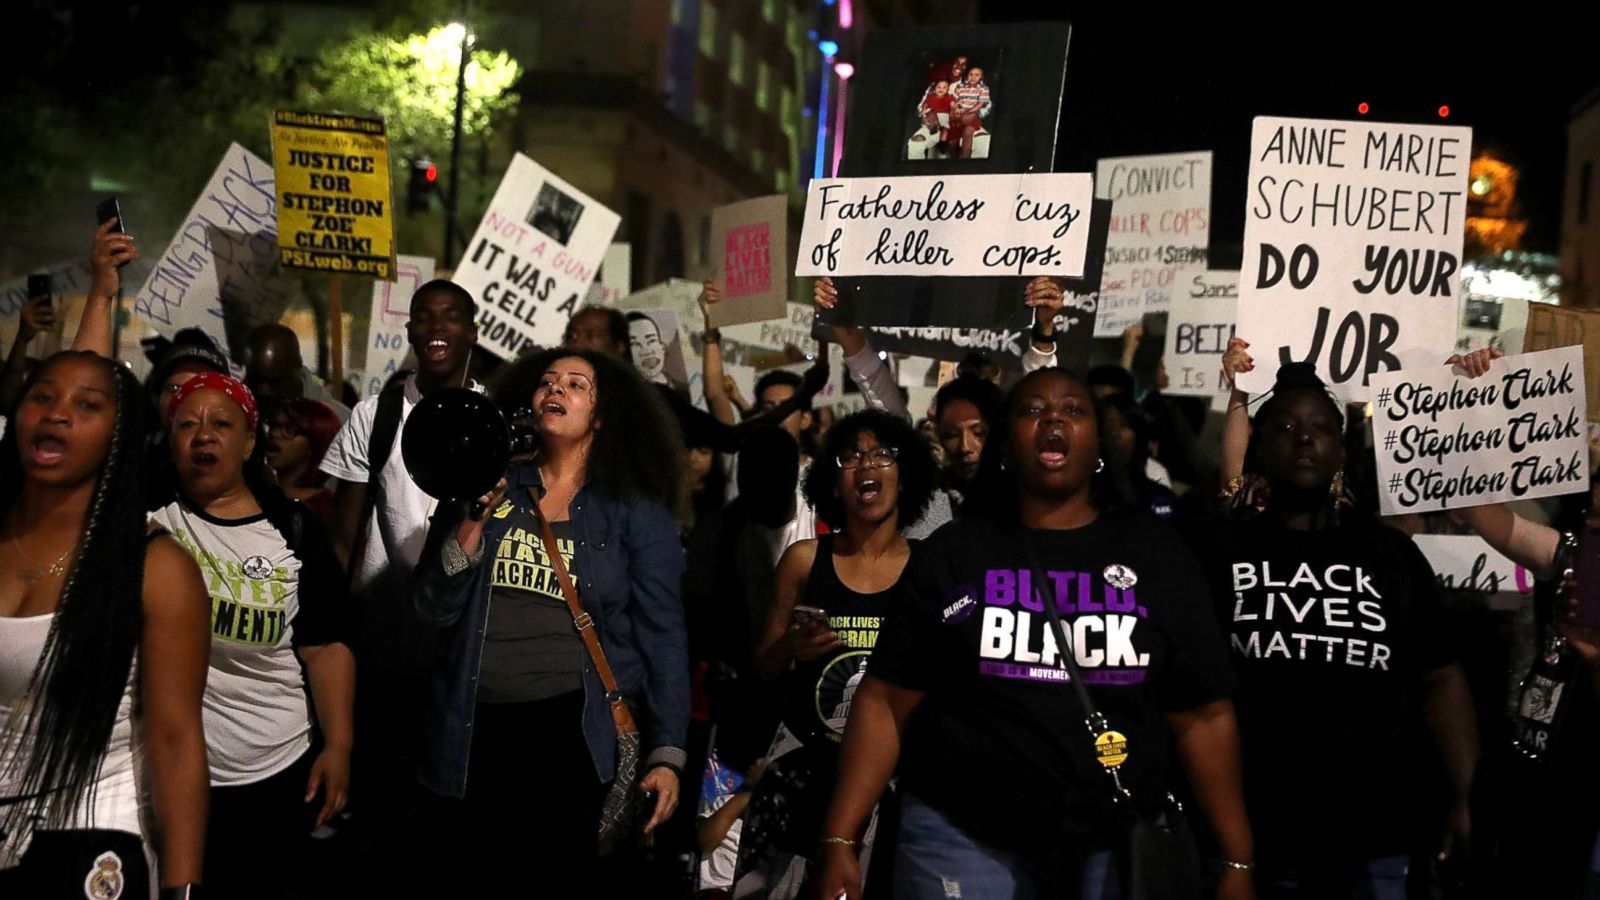 After 5 years, Black Lives Matter inspires new protest movements